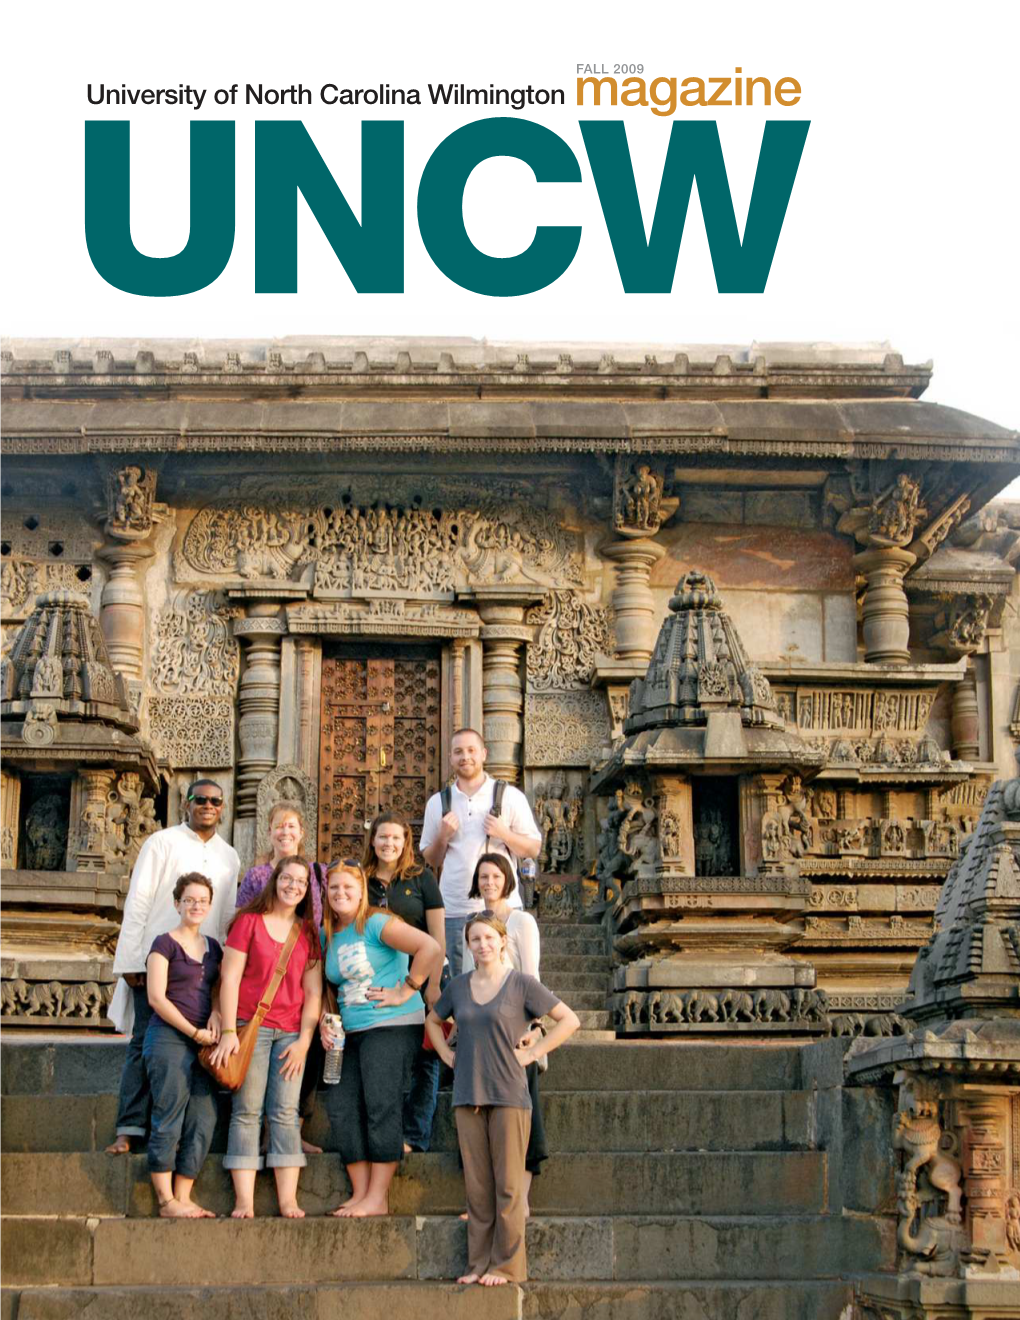 UNCW Magazine Clearly Indicate